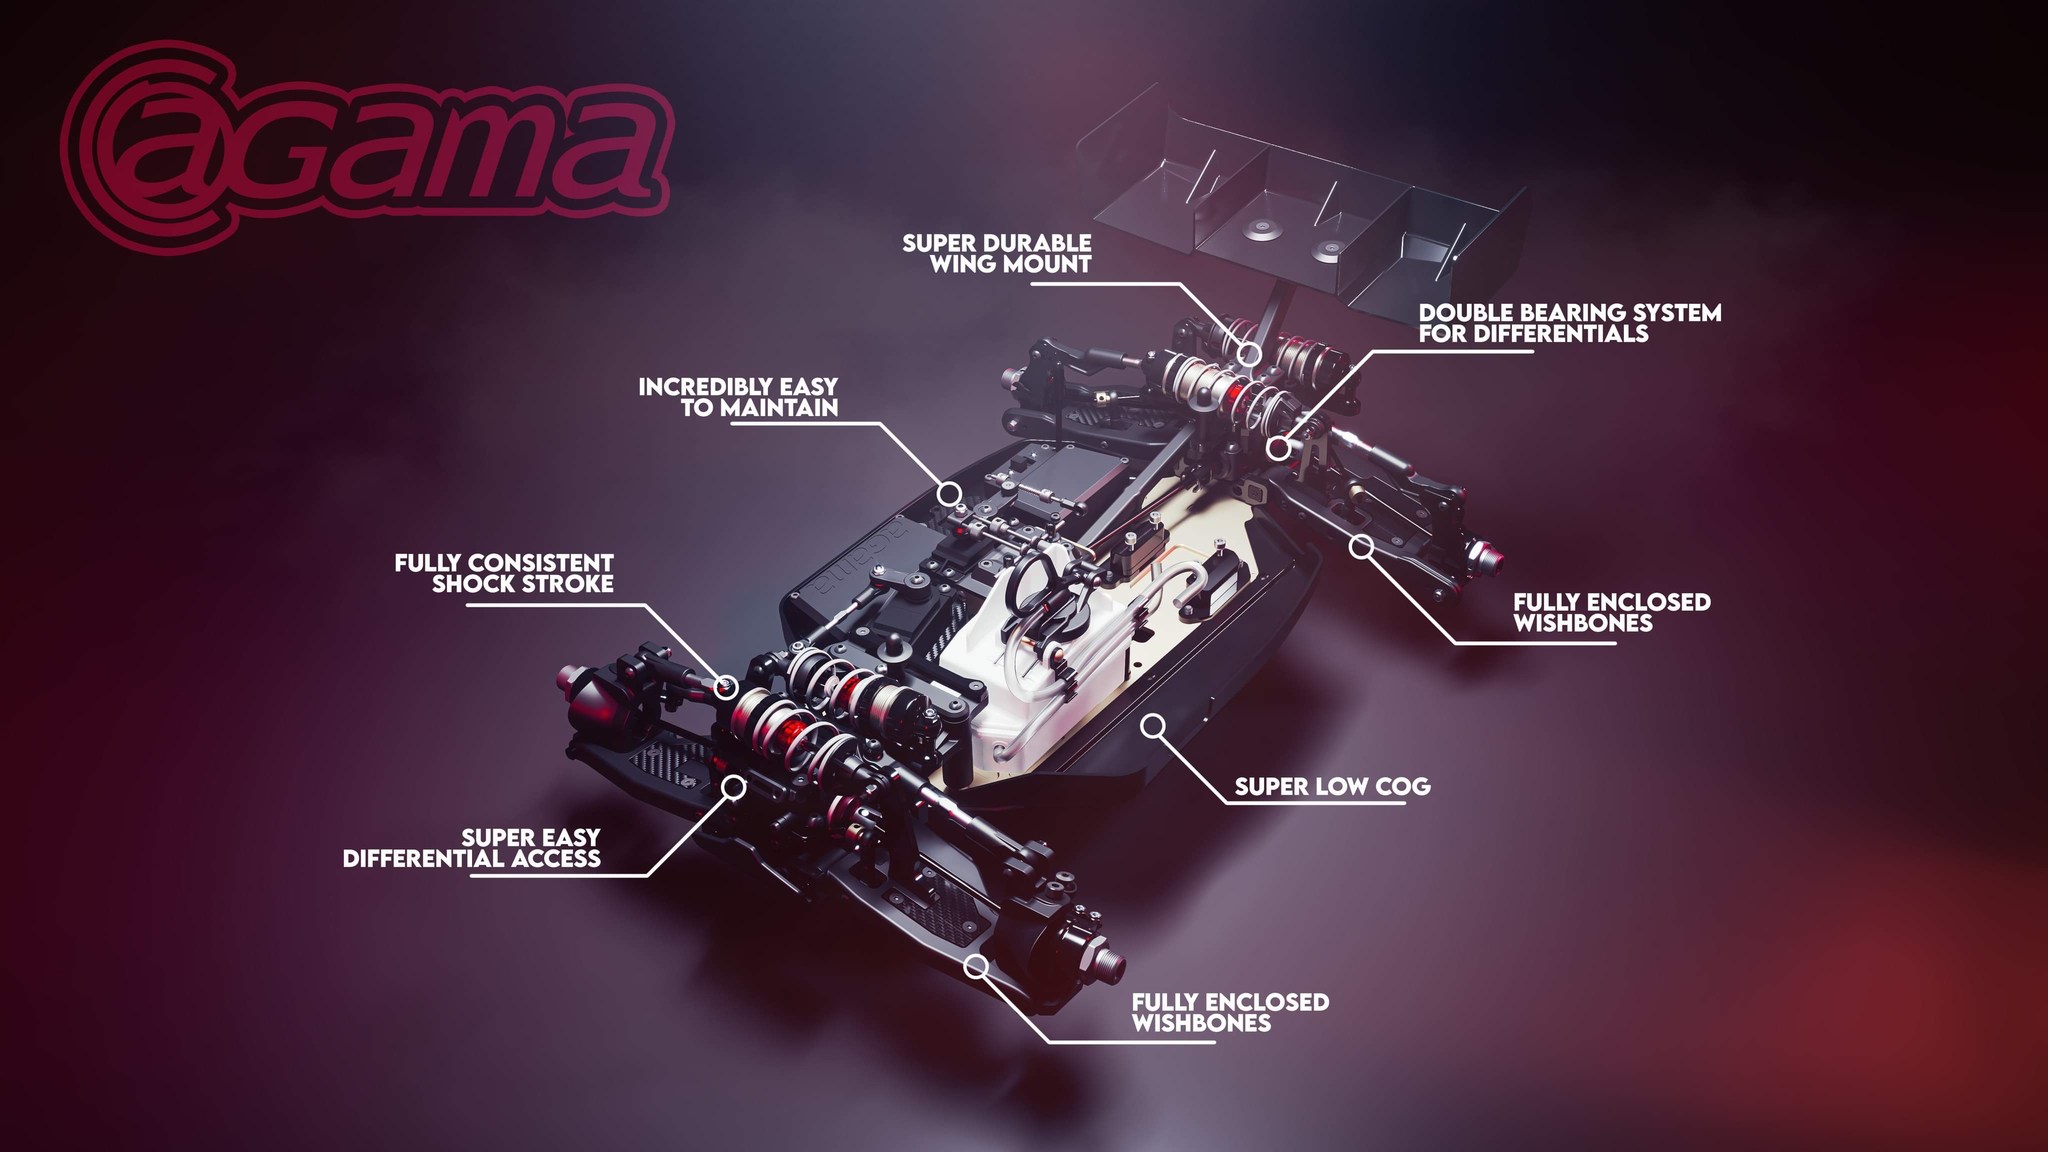 Agama N1 Nitro Competition Buggy Kit Announced